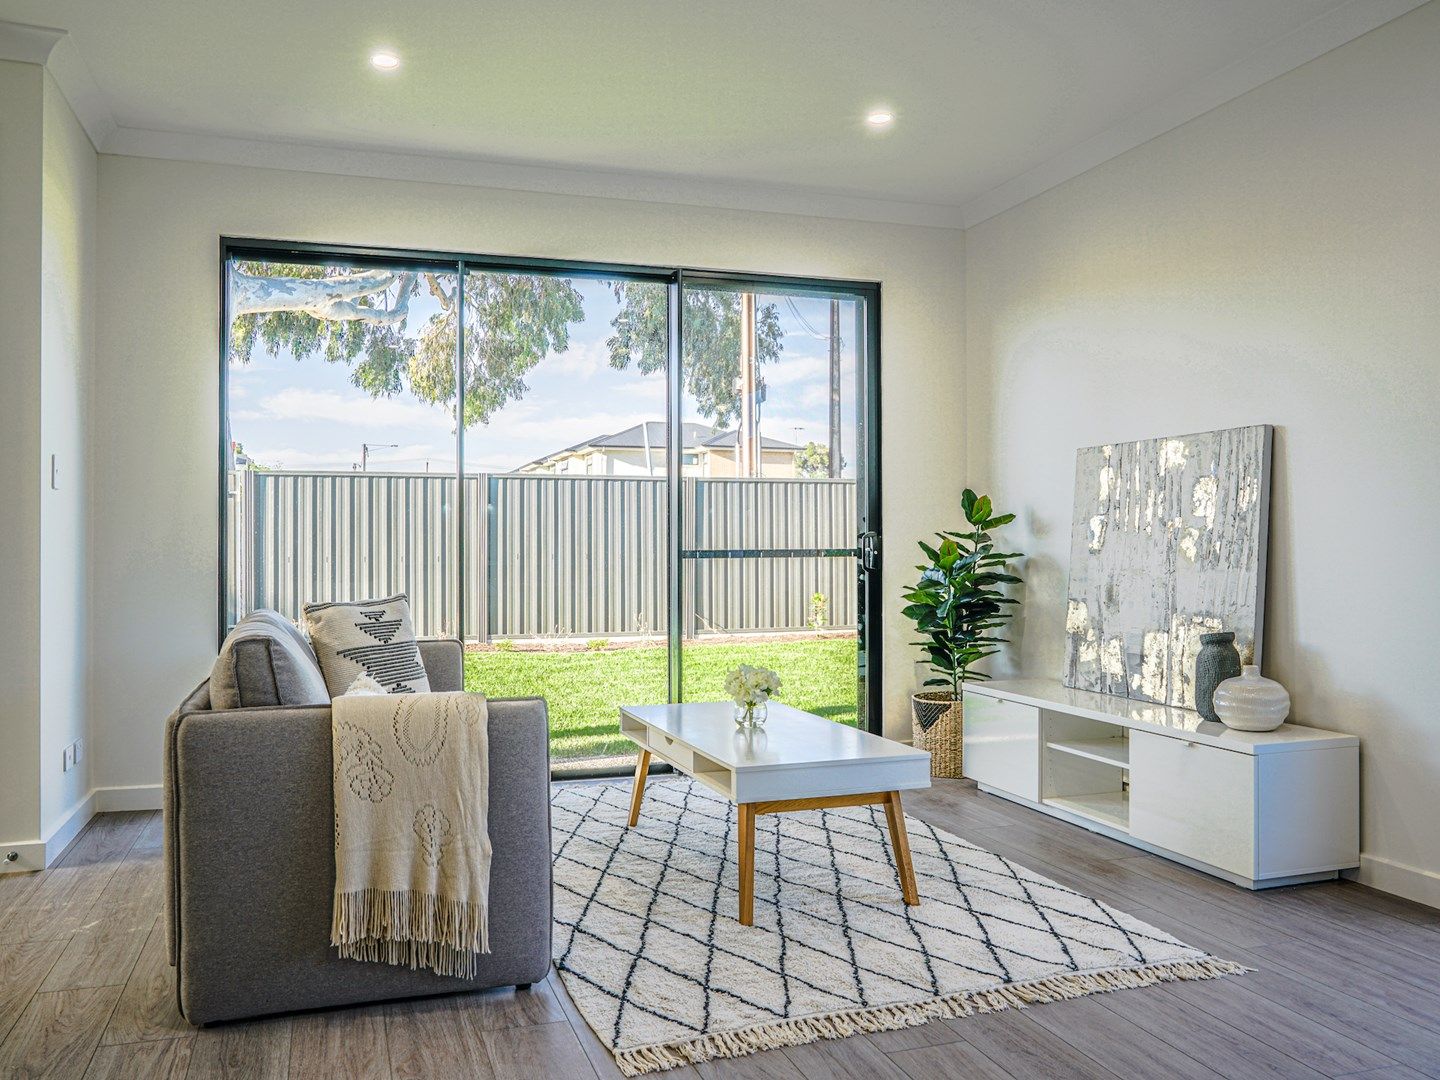 4 bedrooms House in 1/26 Downer Avenue CAMPBELLTOWN SA, 5074